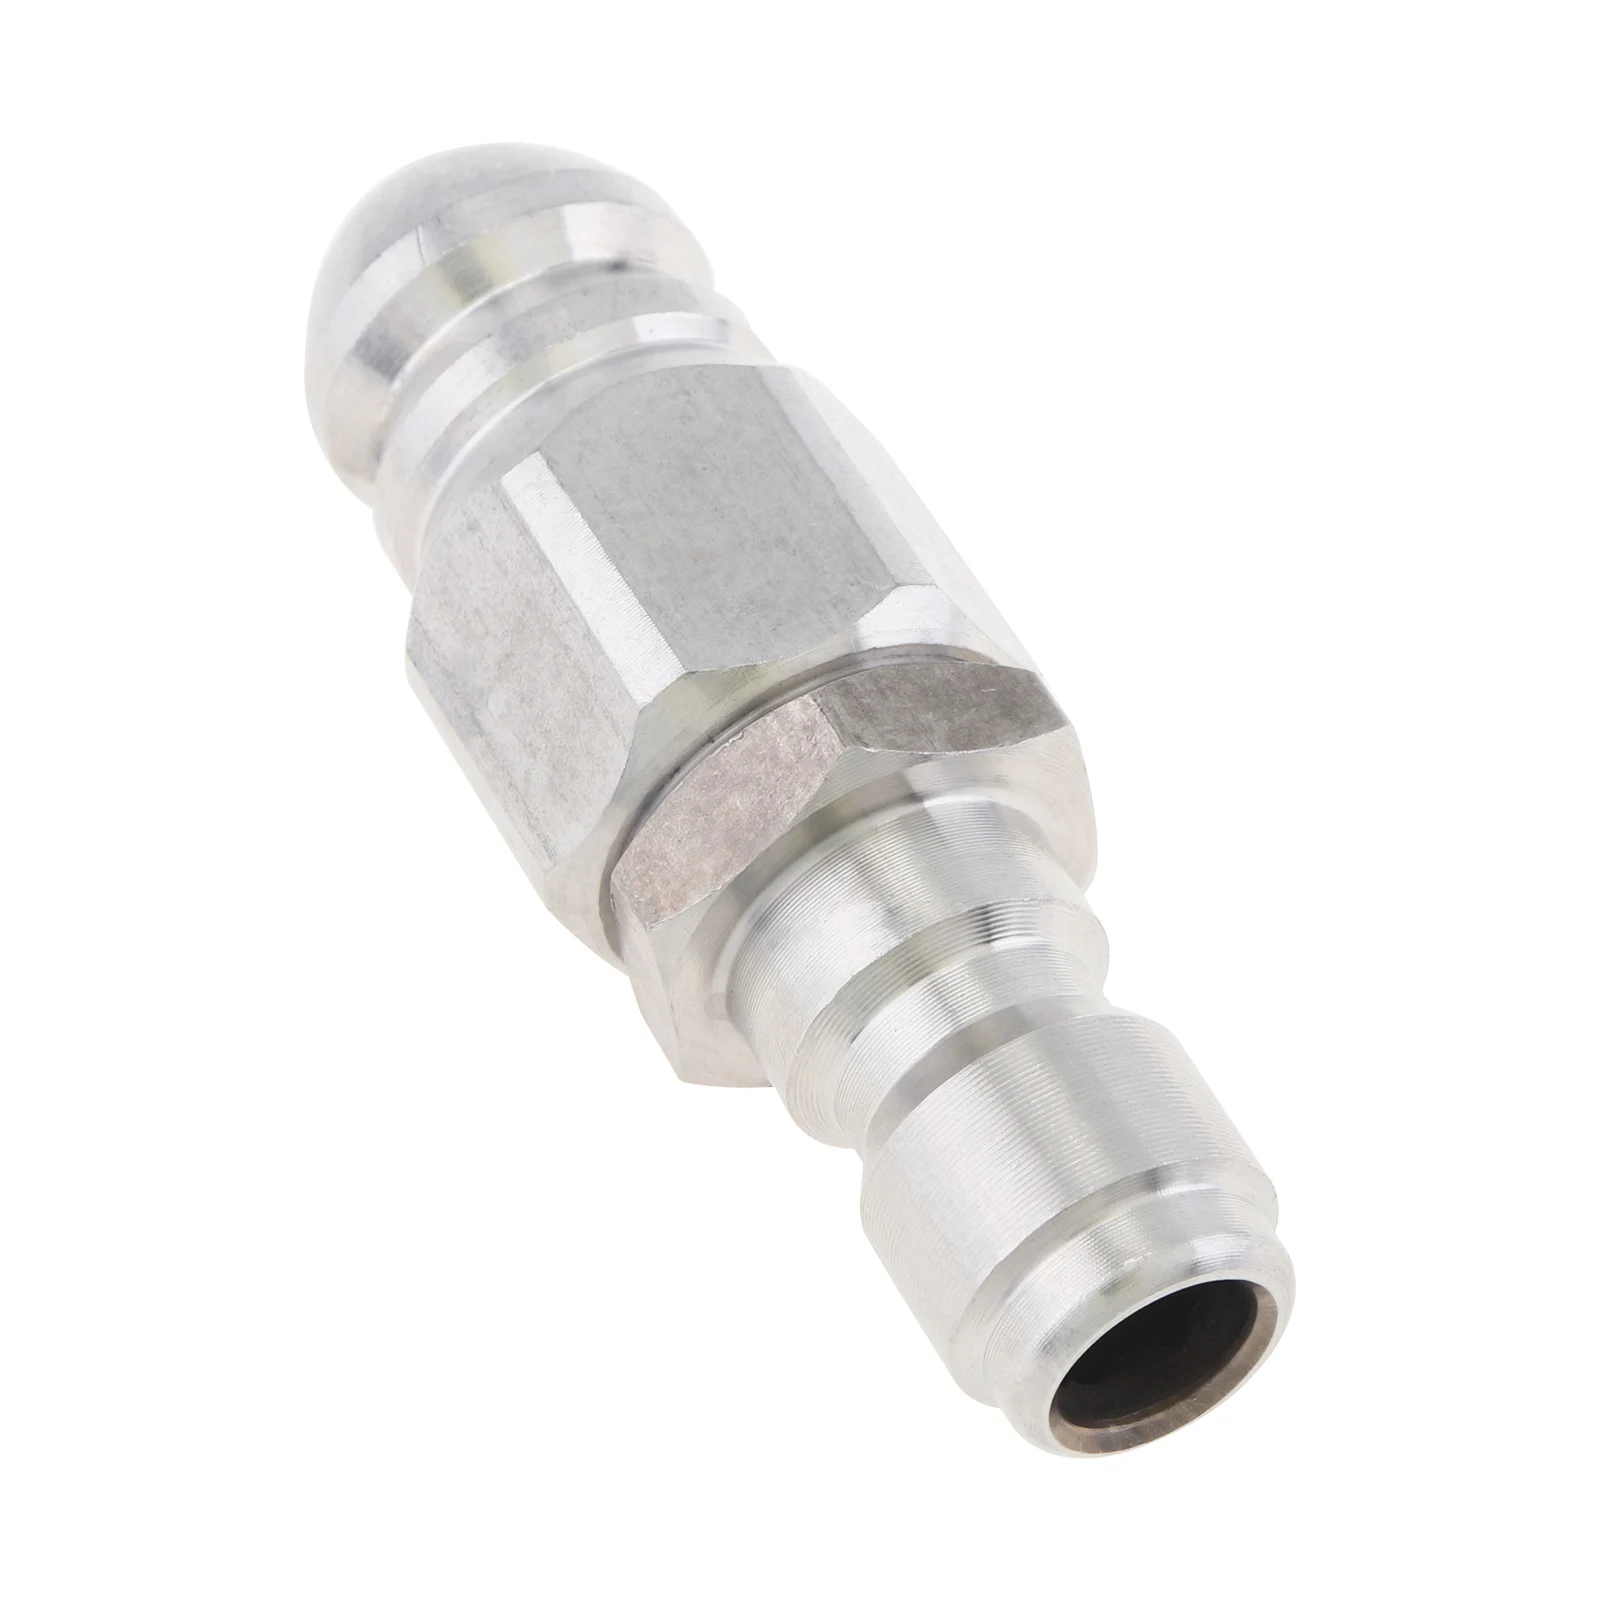 Pressure Washer Sewer Jetter Nozzle Mini Compact Quickly Connector for Drain Jetting Hose, Pressure Drain Jetter Hose Nozzle 4g 3g wcdma gsm antenna full band 3dbi antena 600 2700mhz sma connector wifi antenna for mini pci card usb adapter network rout